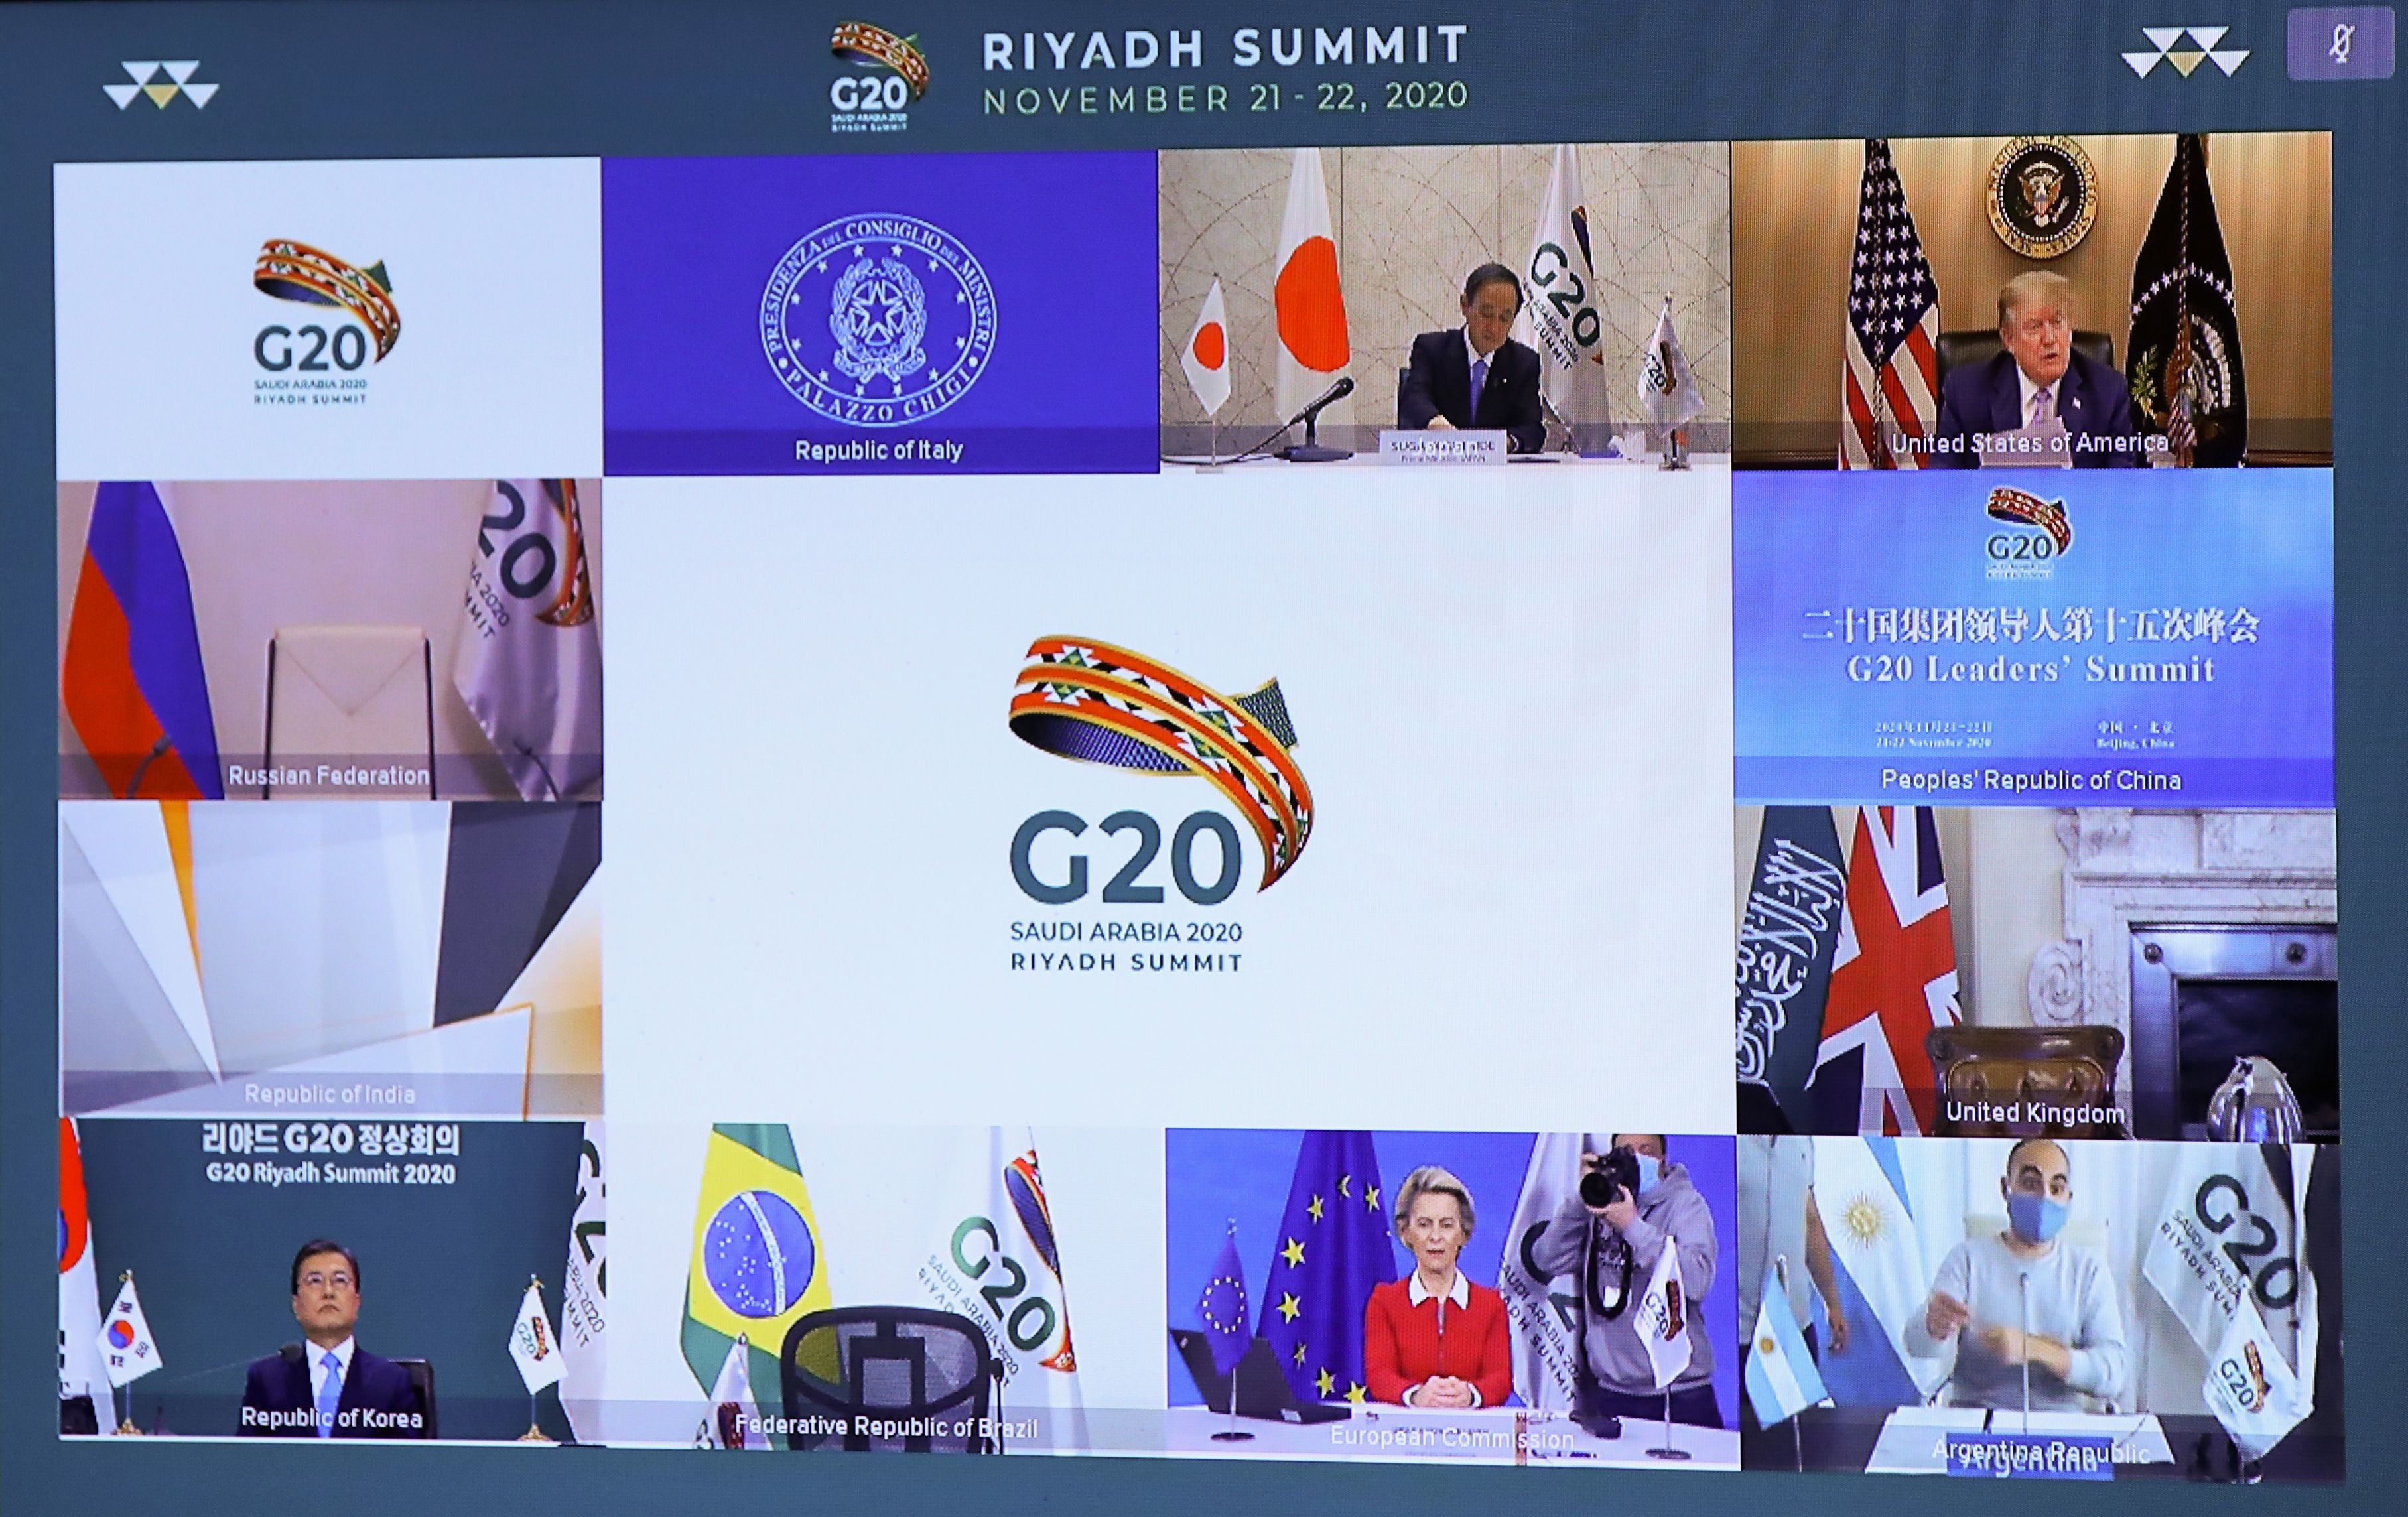 Leaders gather for virtual G20 summit on November 21